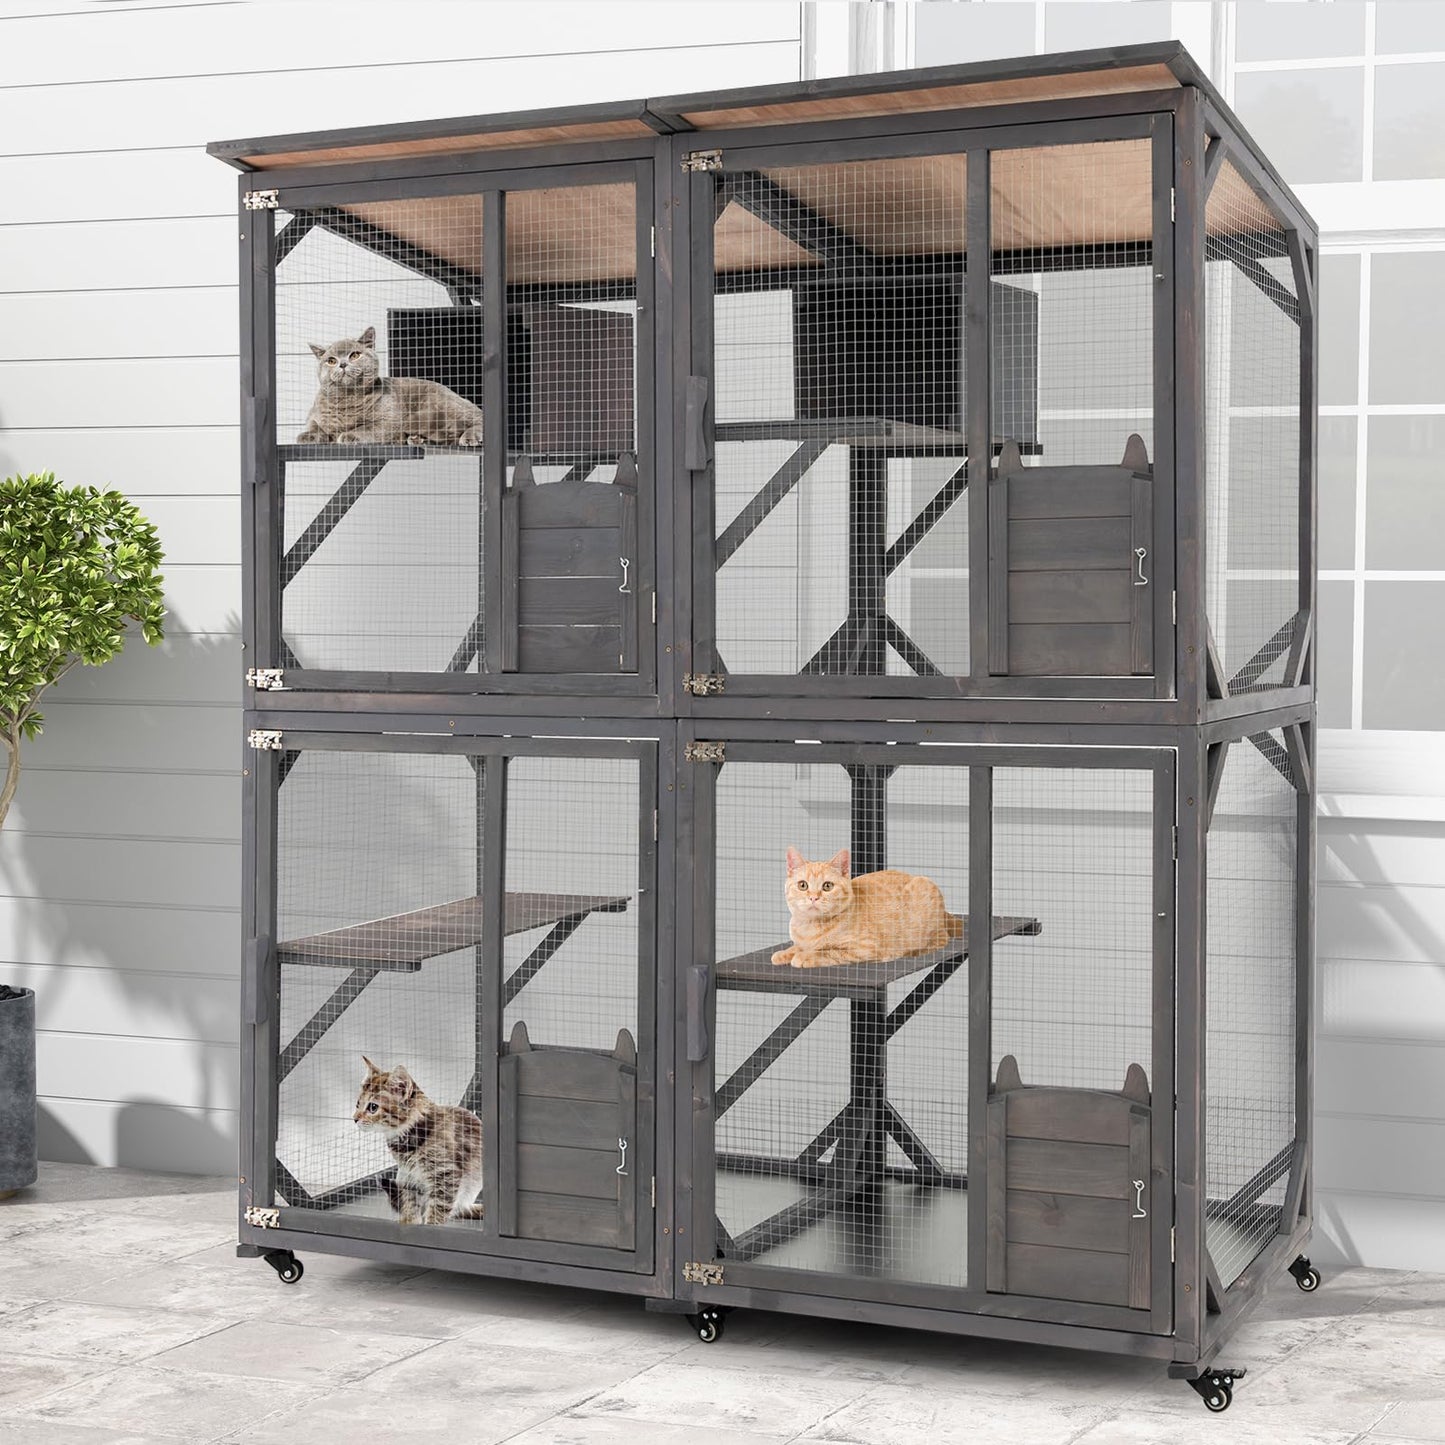 Tangkula Catio Outdoor Cat Enclosure Large, 72 Inch Tall Wooden Cat House with Weatherproof Asphalt Roof, Cat Cage Playpen on Wheels with 4 Platforms & 2 Resting Boxes, Walk-in Cat Kennel Condo